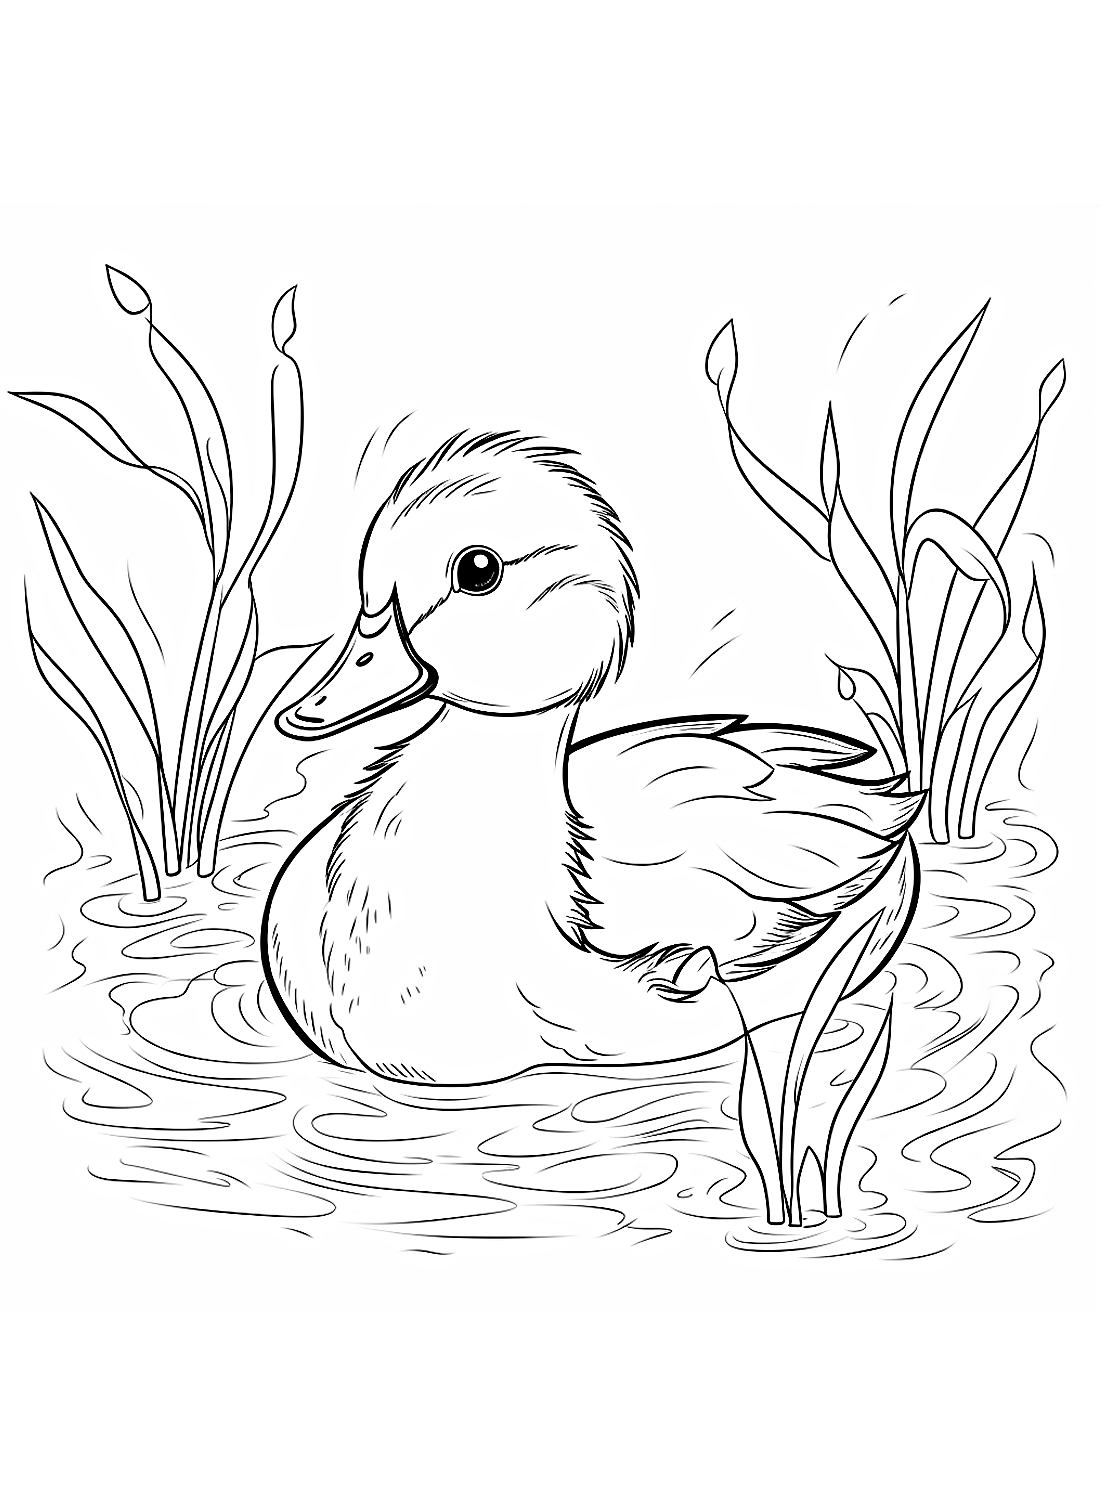 A Swiming duckling from Duckling